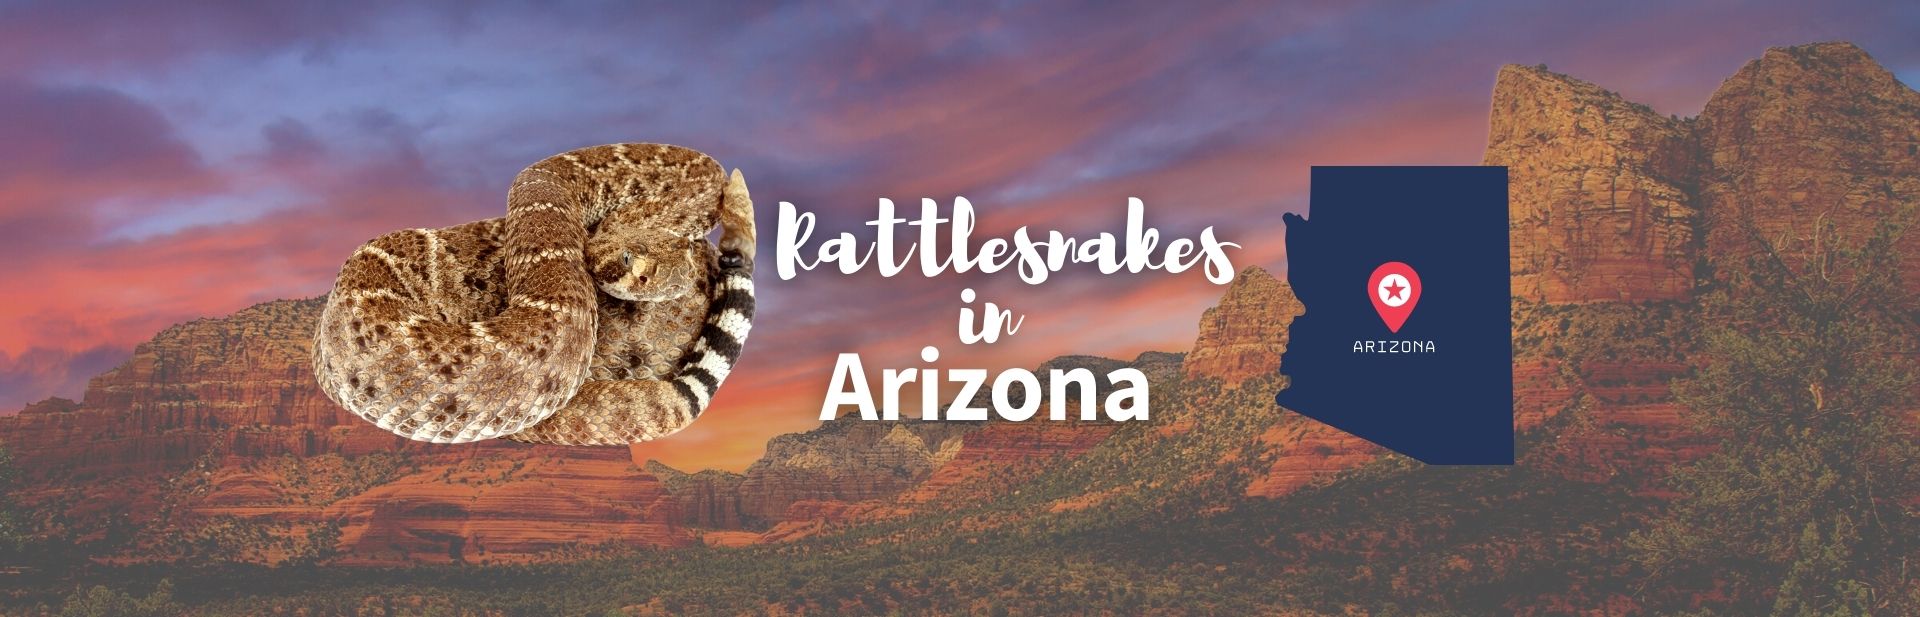 The 13 Types Of Rattlesnakes in Arizona: Facts and Pictures